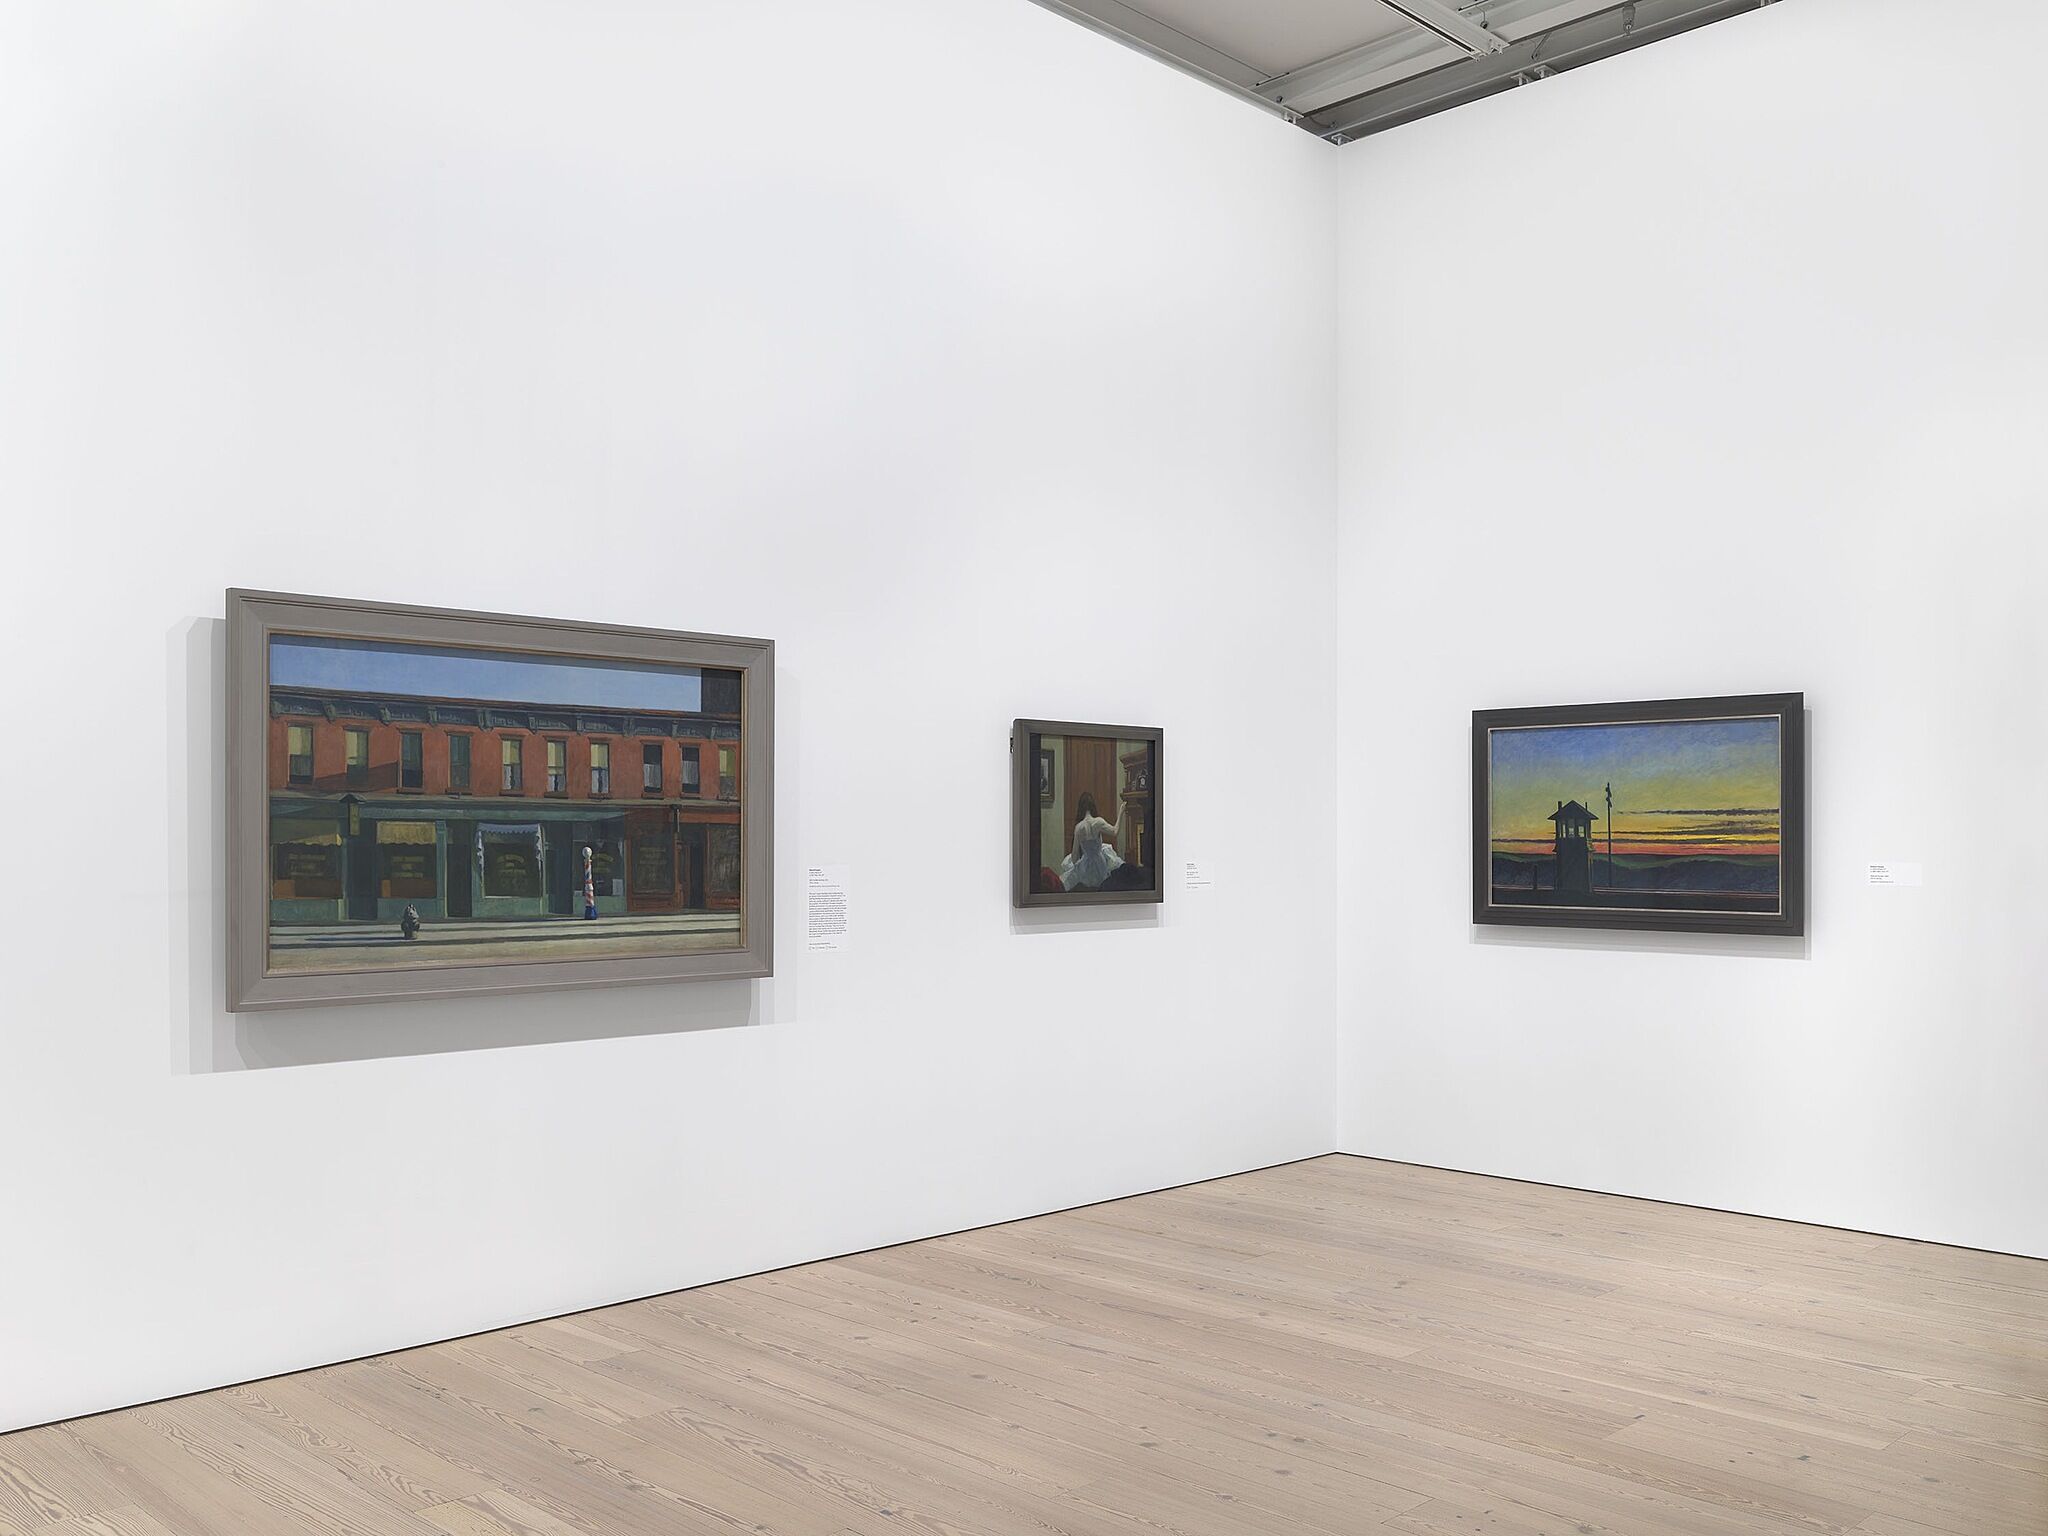 An image of the Whitney galleries